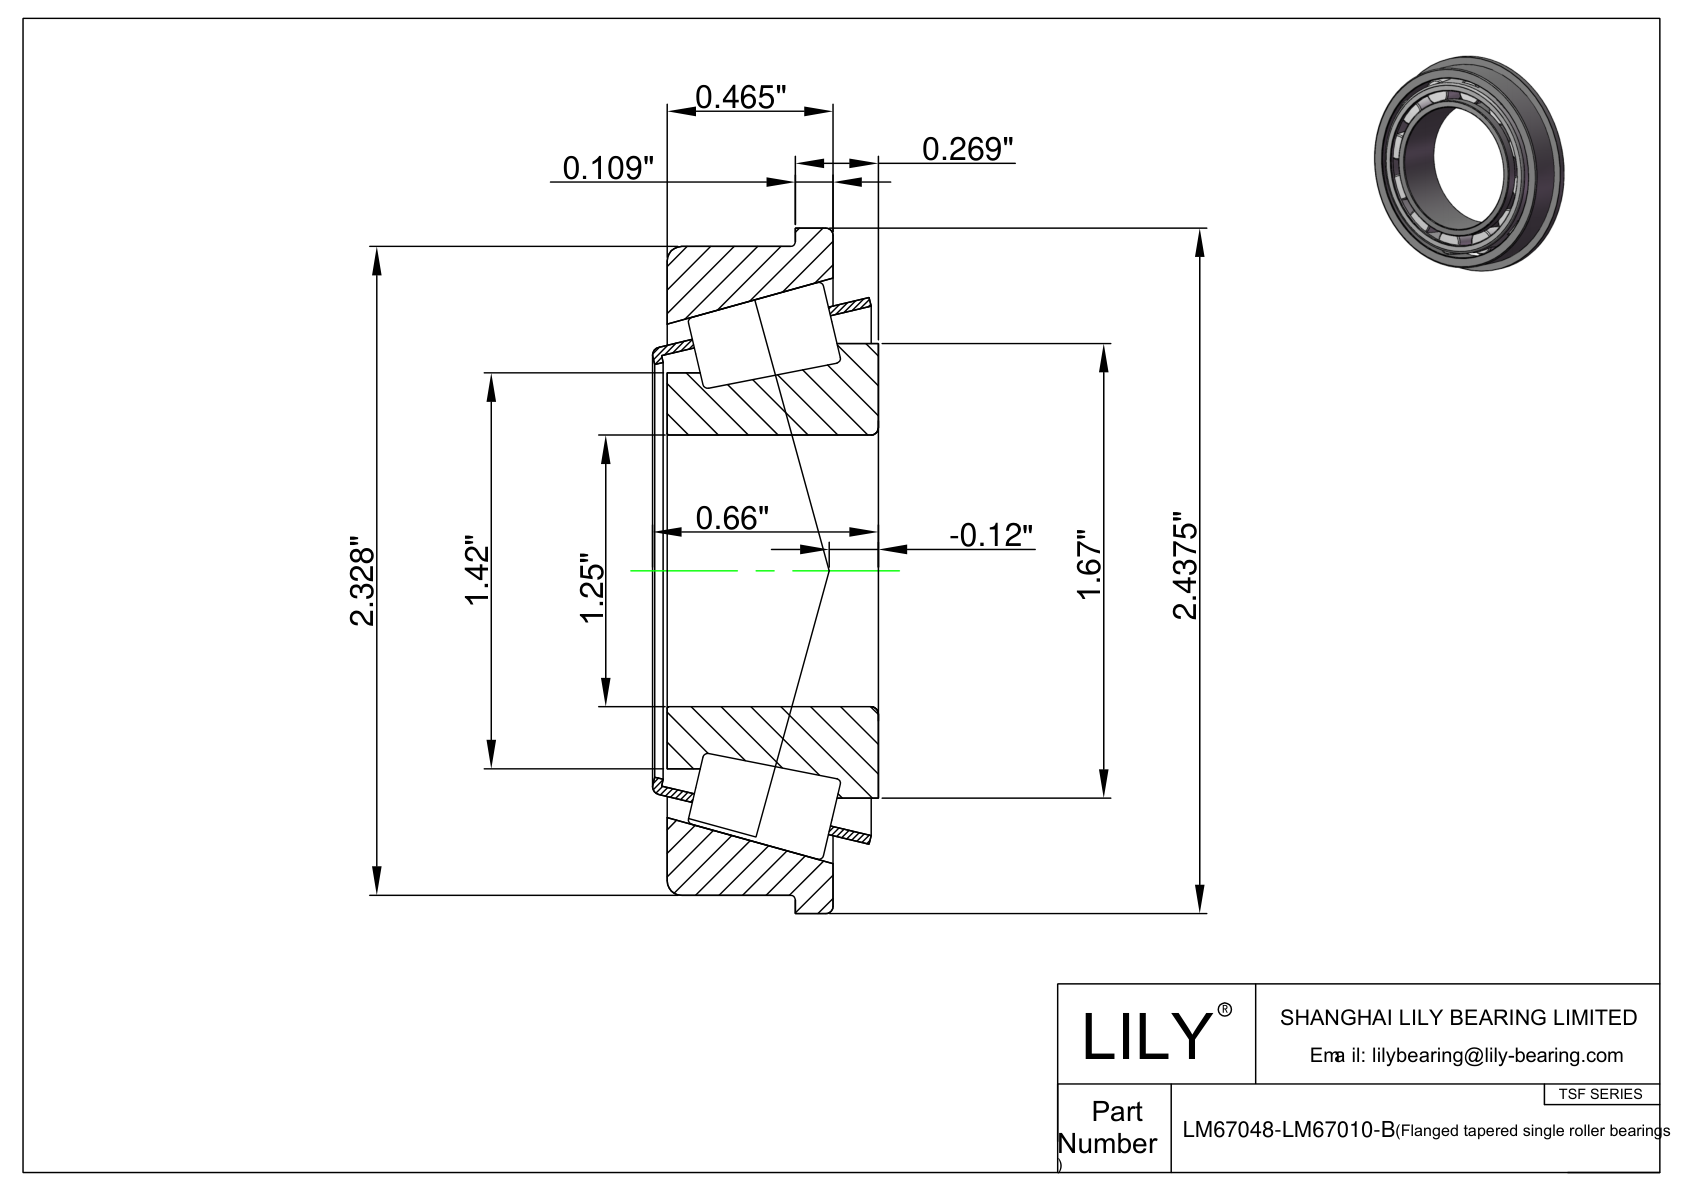 LM67048-LM67010-B TSF (Tapered Single Roller Bearings with Flange) (Imperial) cad drawing